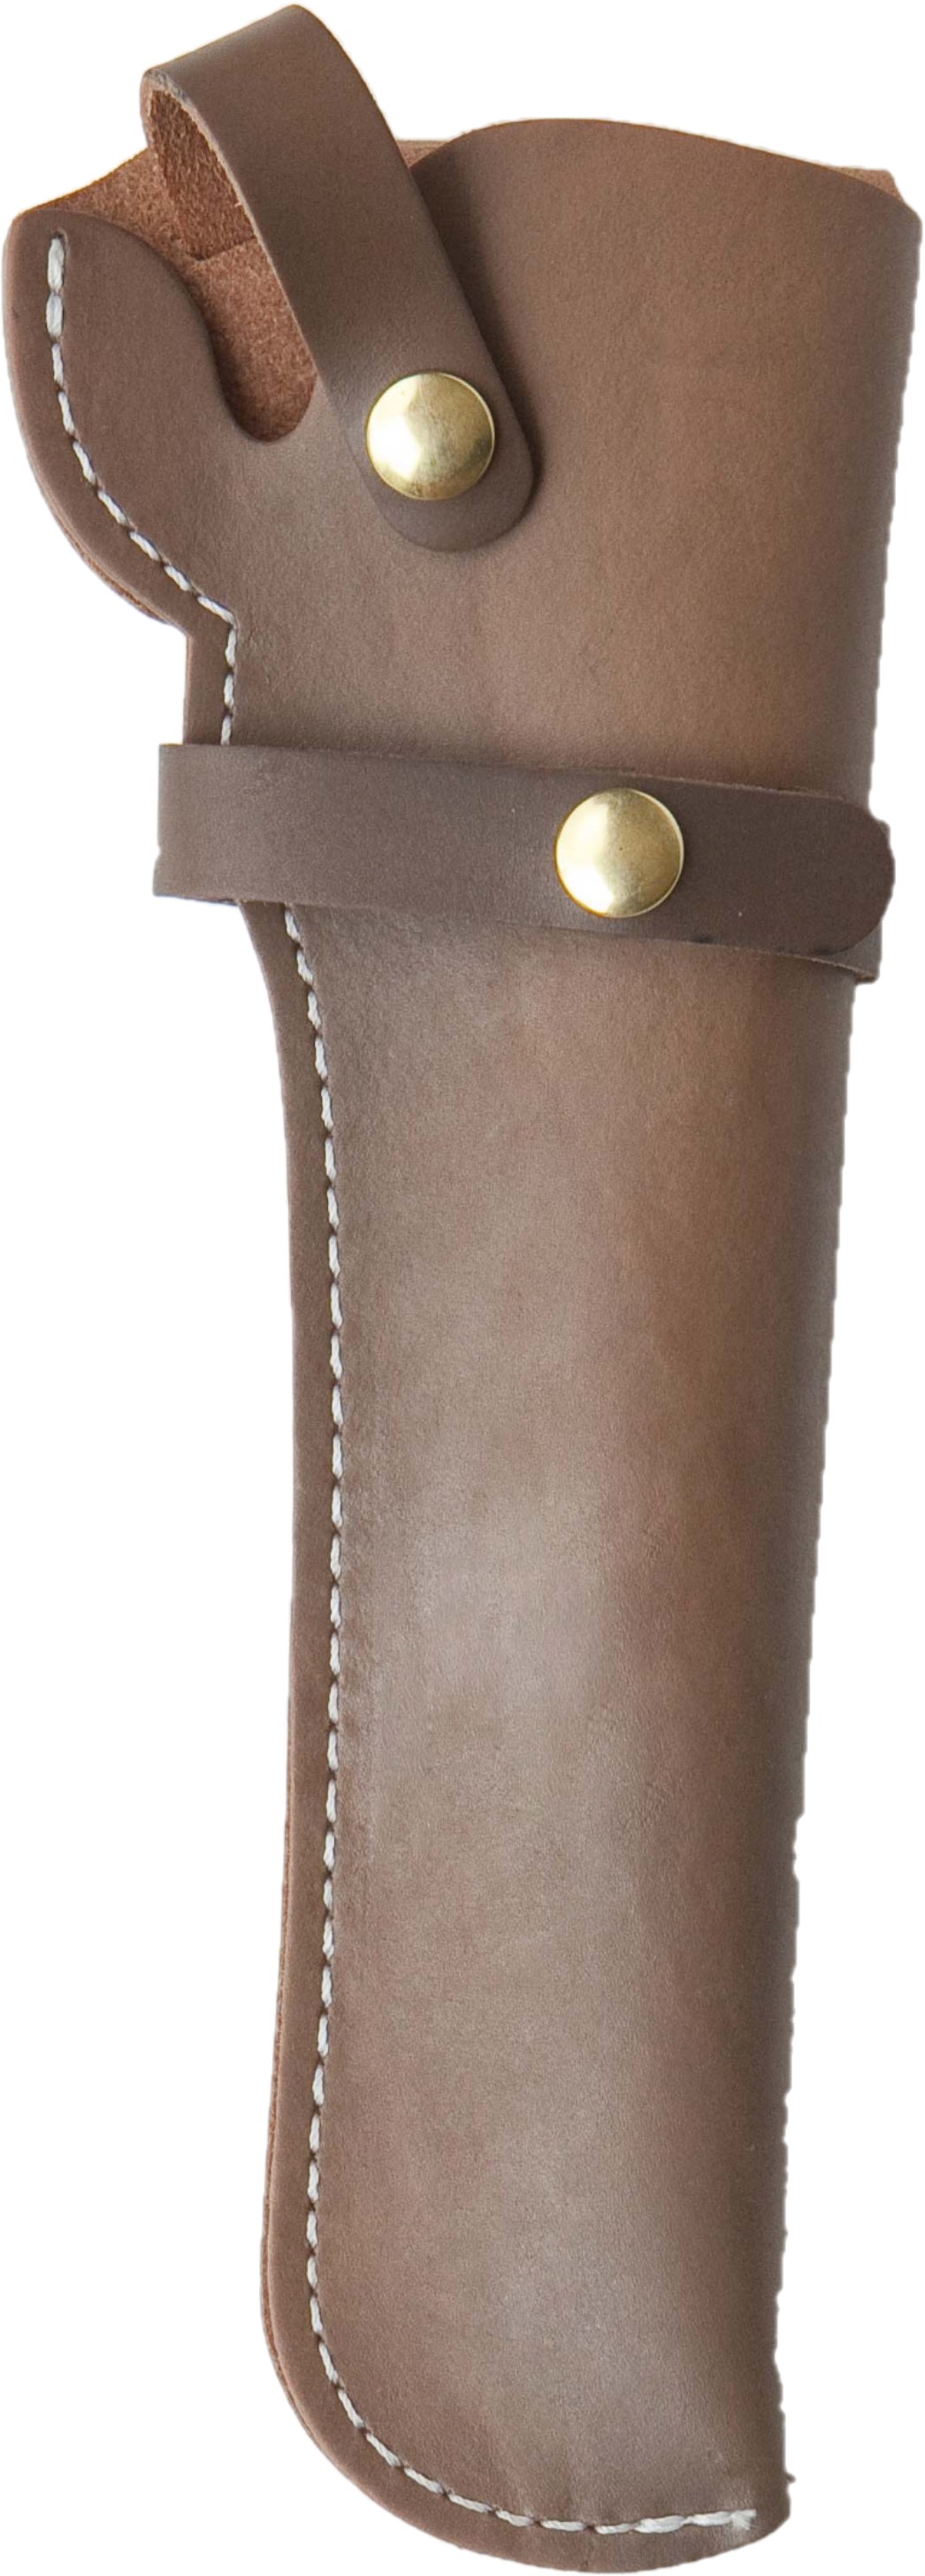 MODERN HUNTING STYLE HOLSTER RIGHT HAND ONLY